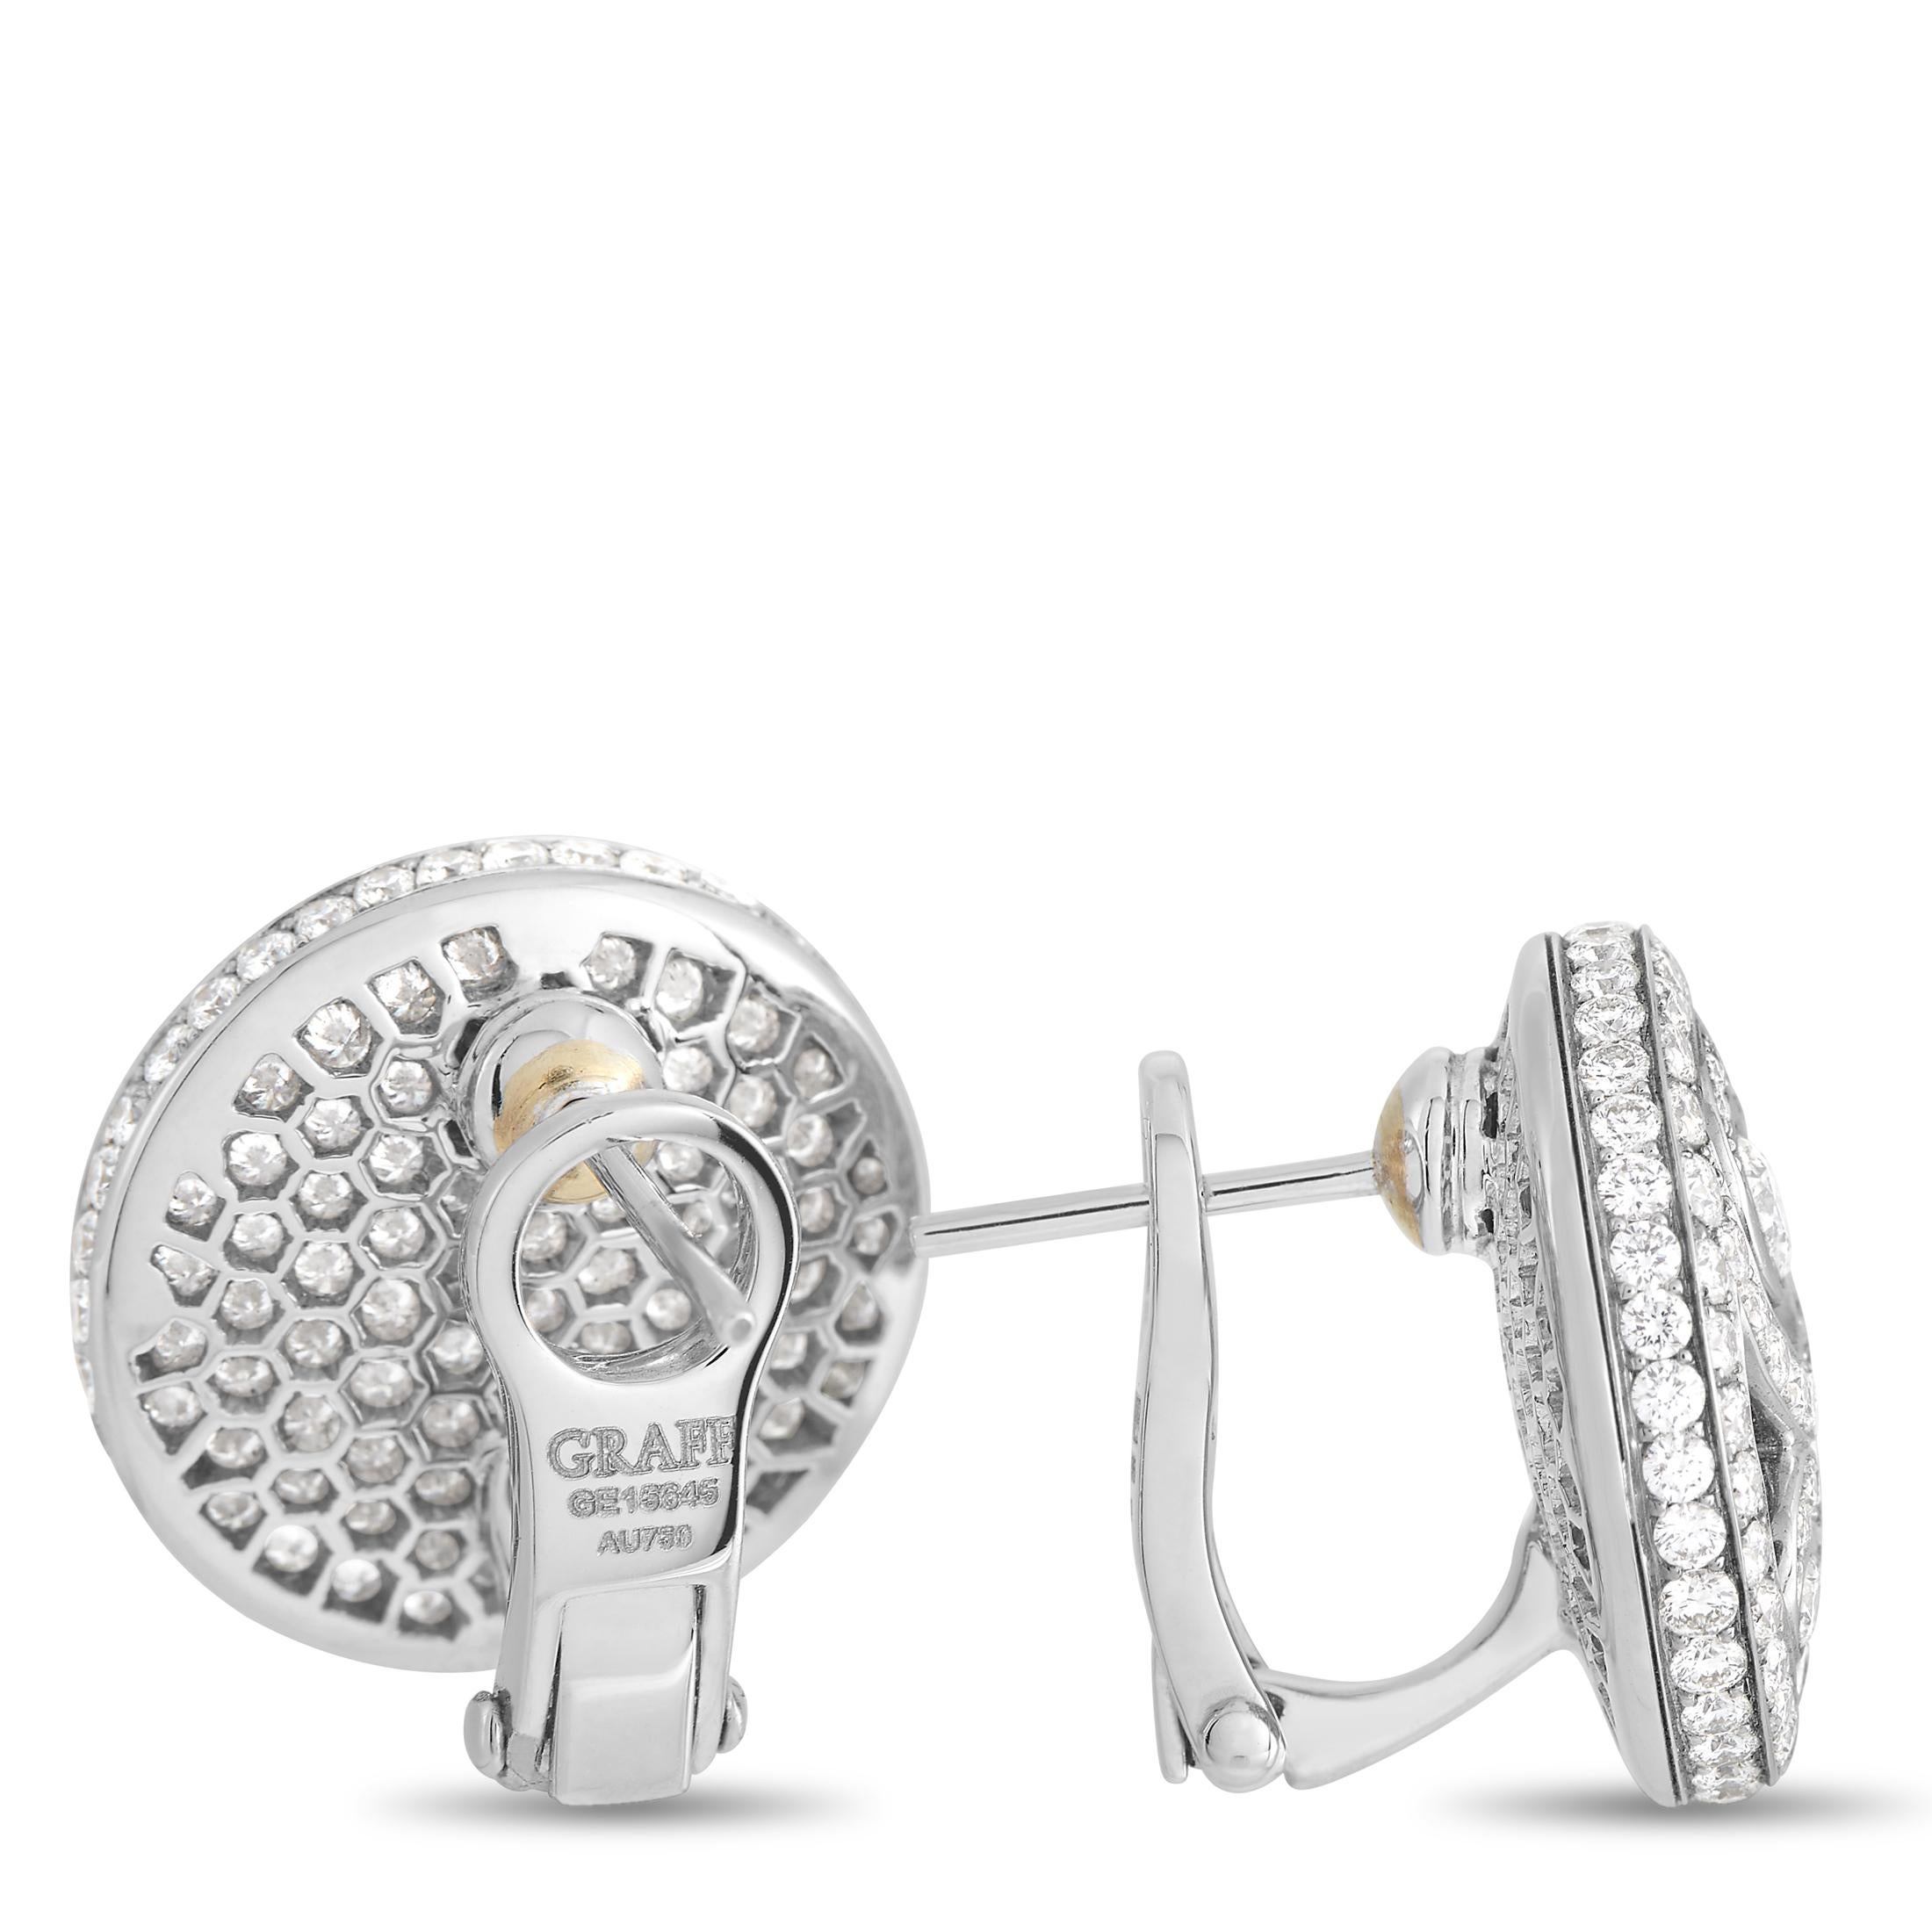 Stylish swirls and a shimmering 18K White Gold setting come together to create a pair of earrings that are nothing short of spectacular. Together, they feature a striking 5.29 carats of diamonds with E color and VVS clarity. Each one measures 0.75”